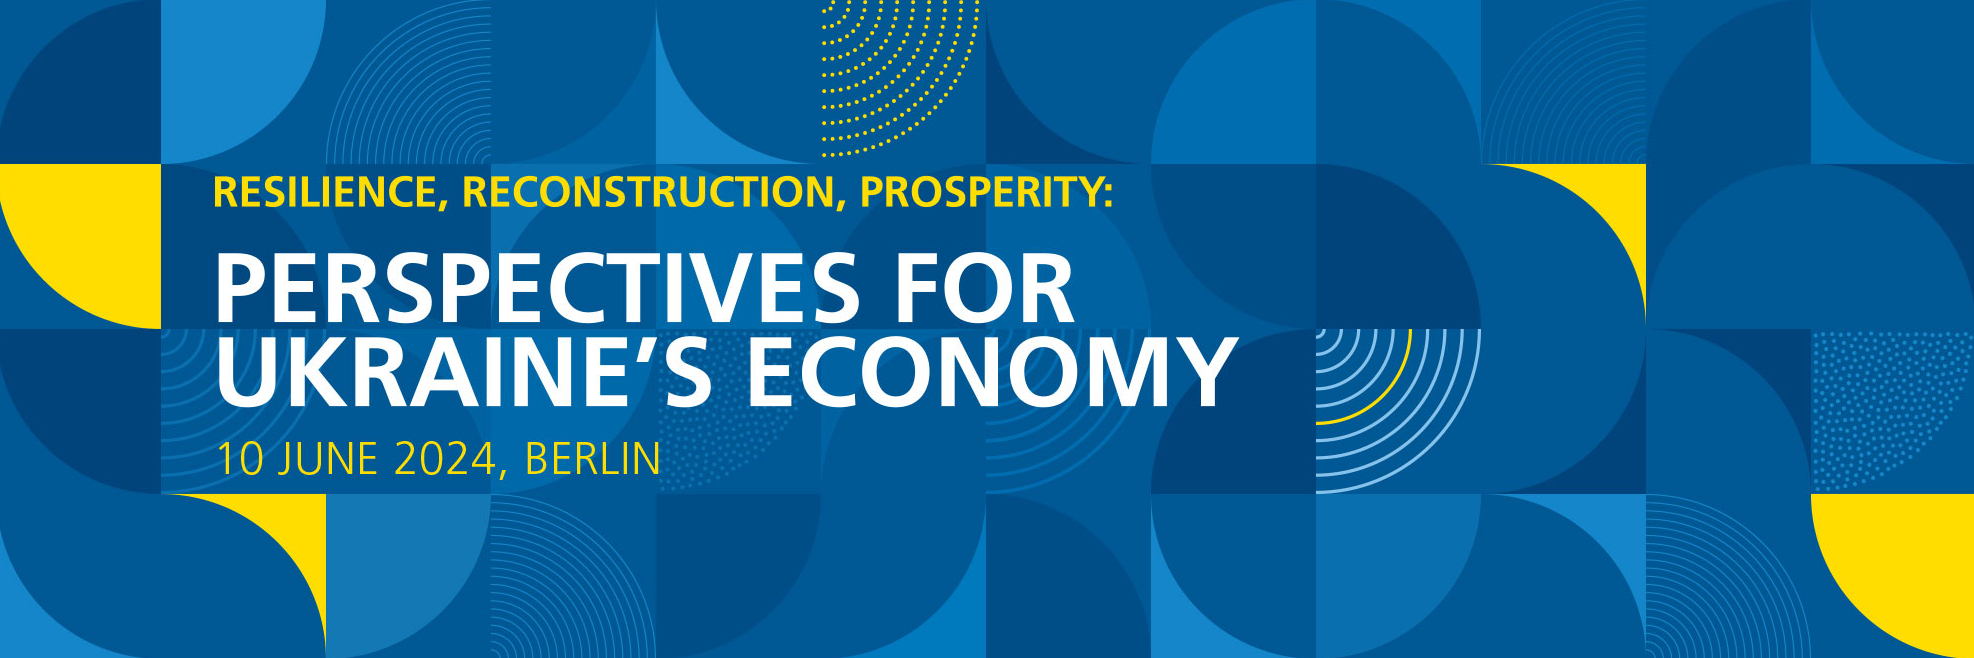 Banner for the Ukraine Recovery Conference on 10th June 2024 in Berlin with the title "Resilience, Reconstruction, Prosperity - Perspectives for Ukraines Economy"